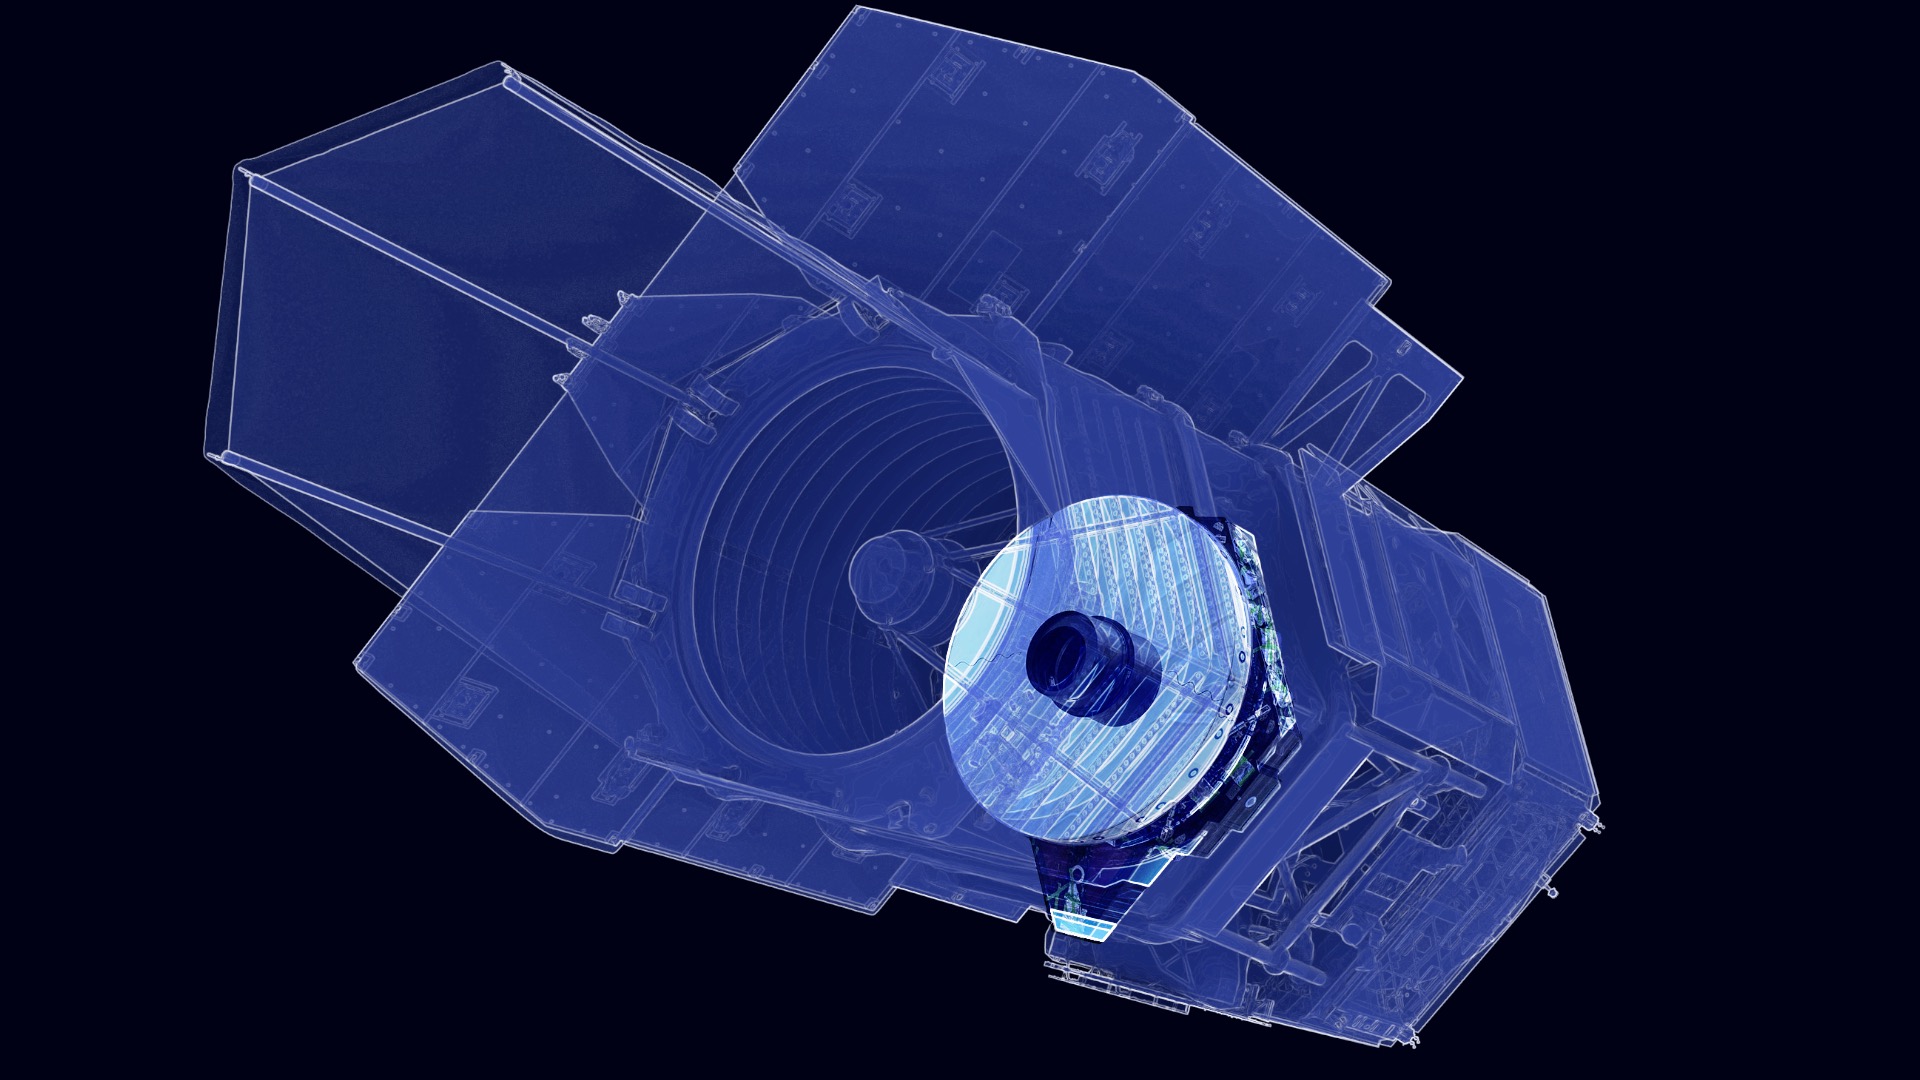 Short animation transitioning from a photograph of the Nancy Grace Roman Space Telescope primary mirror in a clean room to a computer model of the spacecraft showing how the mirror is positioned within the spacecraft.Credit: NASA's Goddard Space Flight Center/L3 Harris